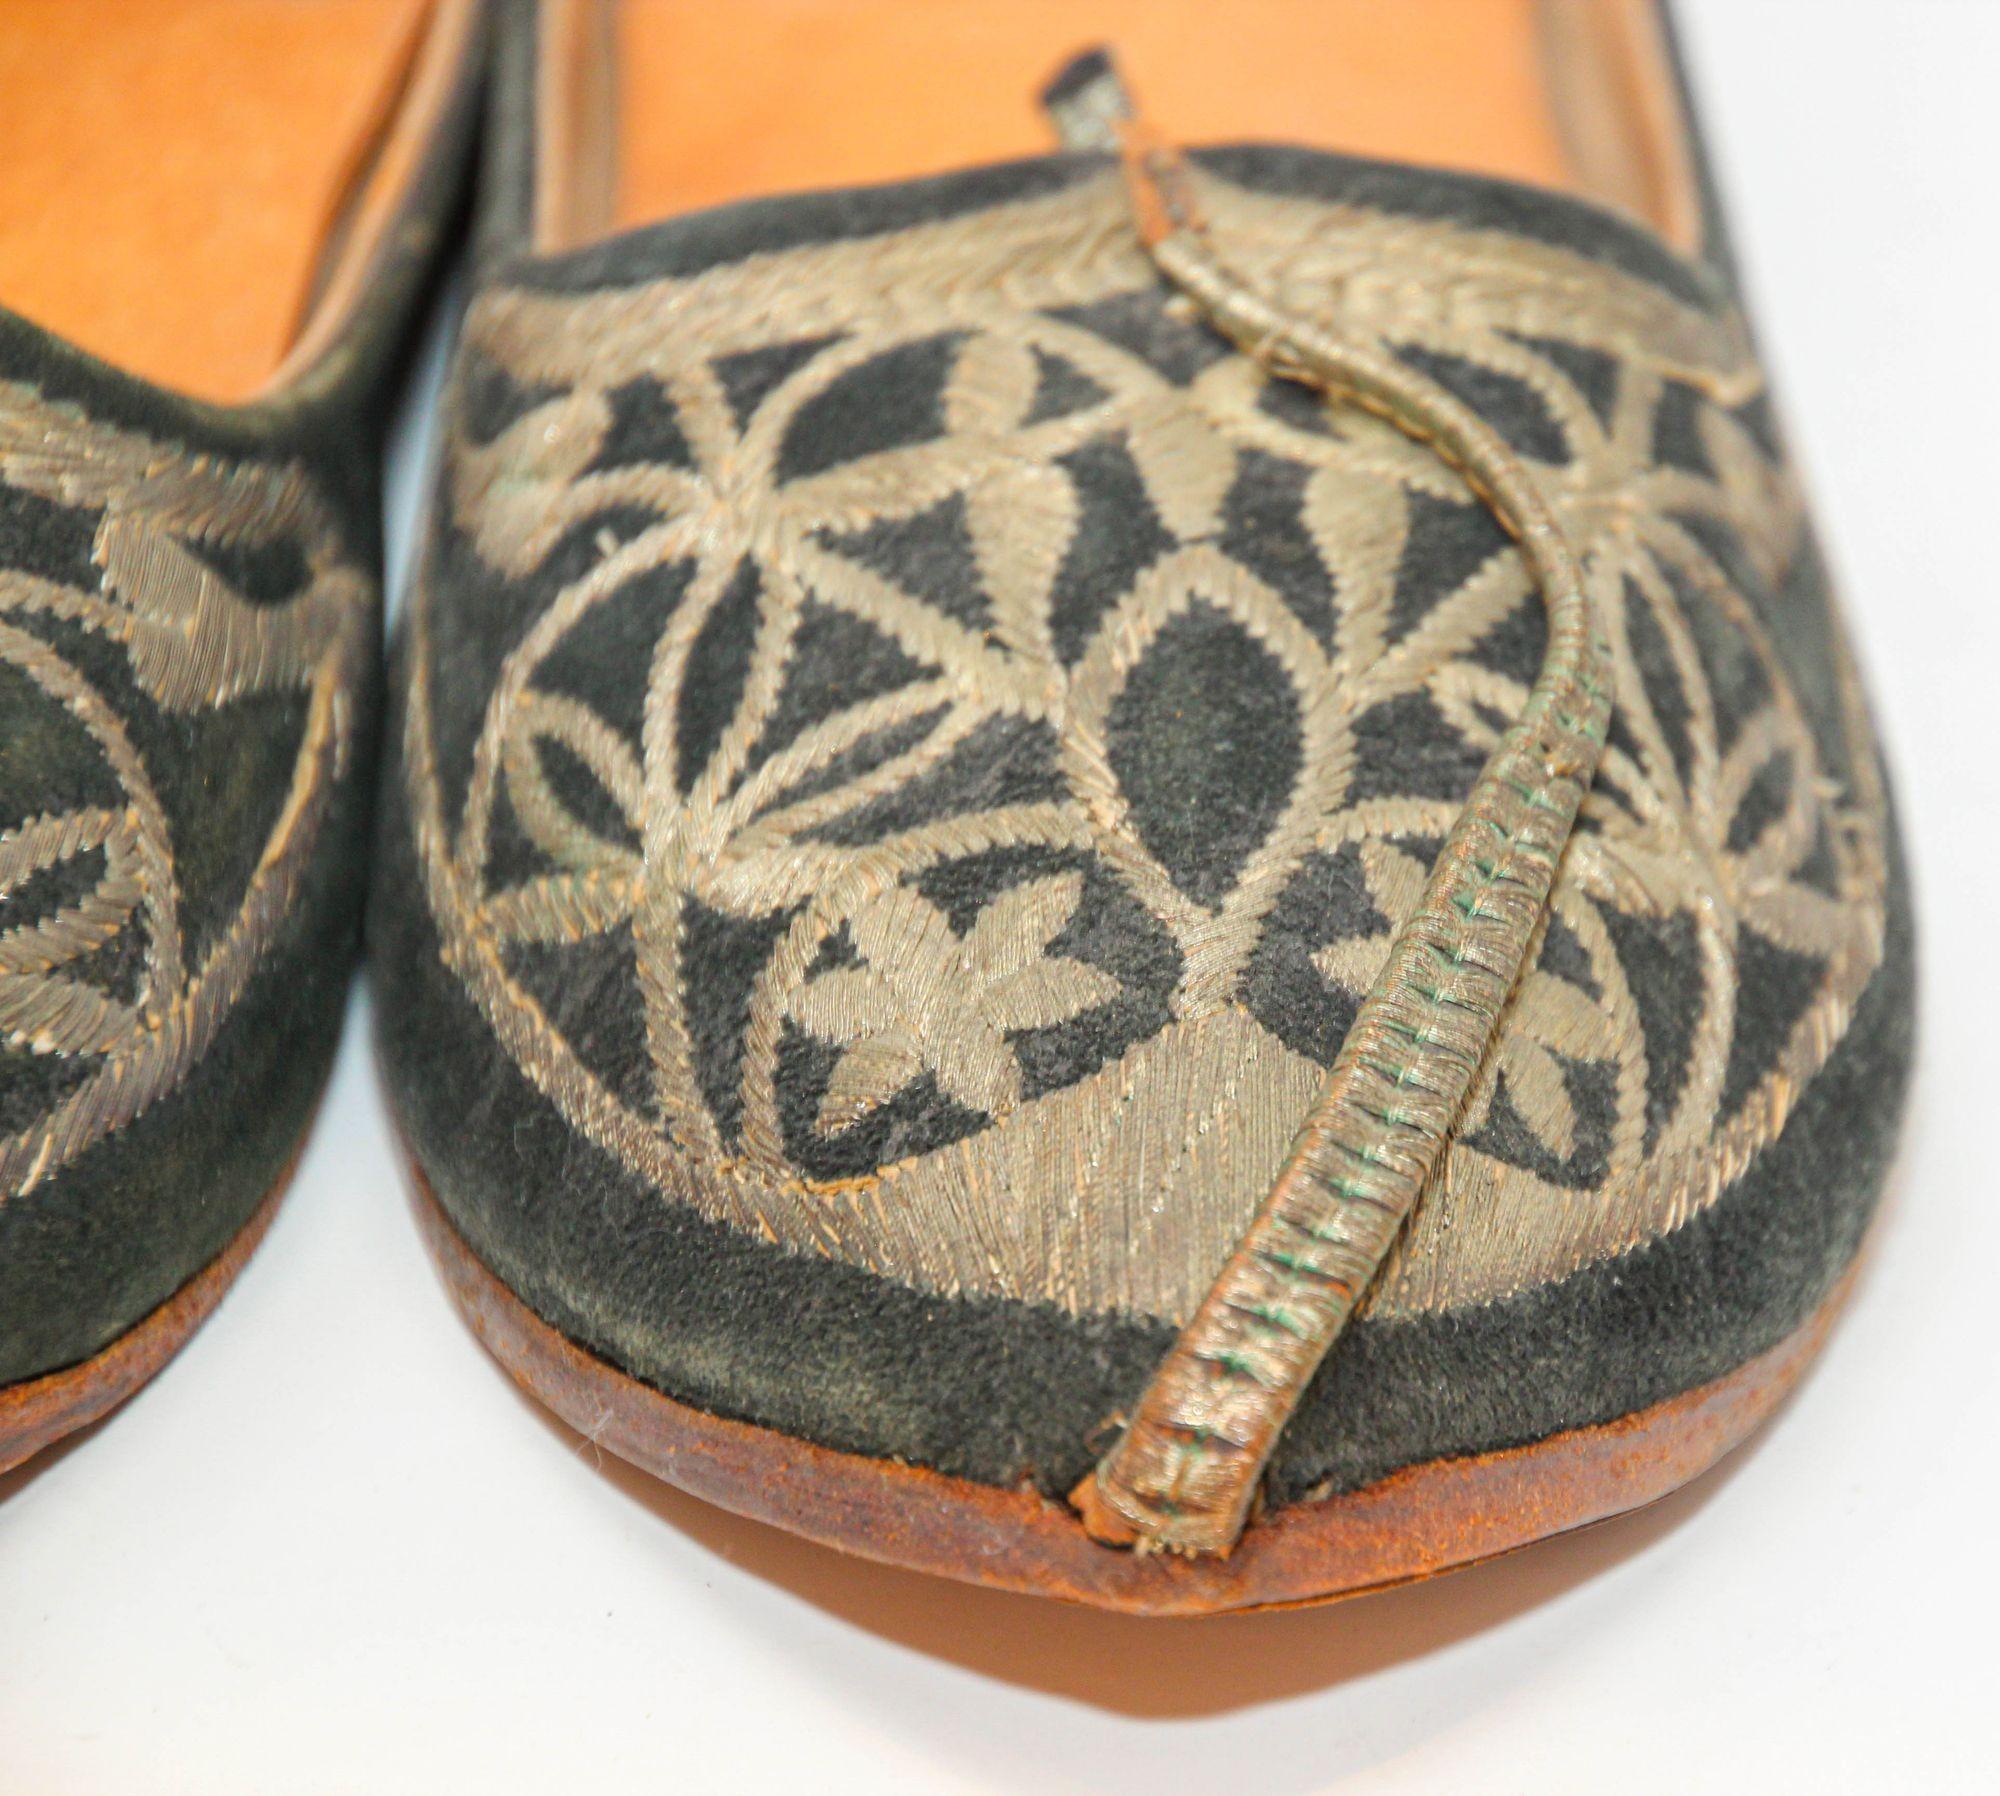 Embroidered Moorish Mughal Style Curled Toe Black Leather Shoes from Tony Duquette Estate For Sale